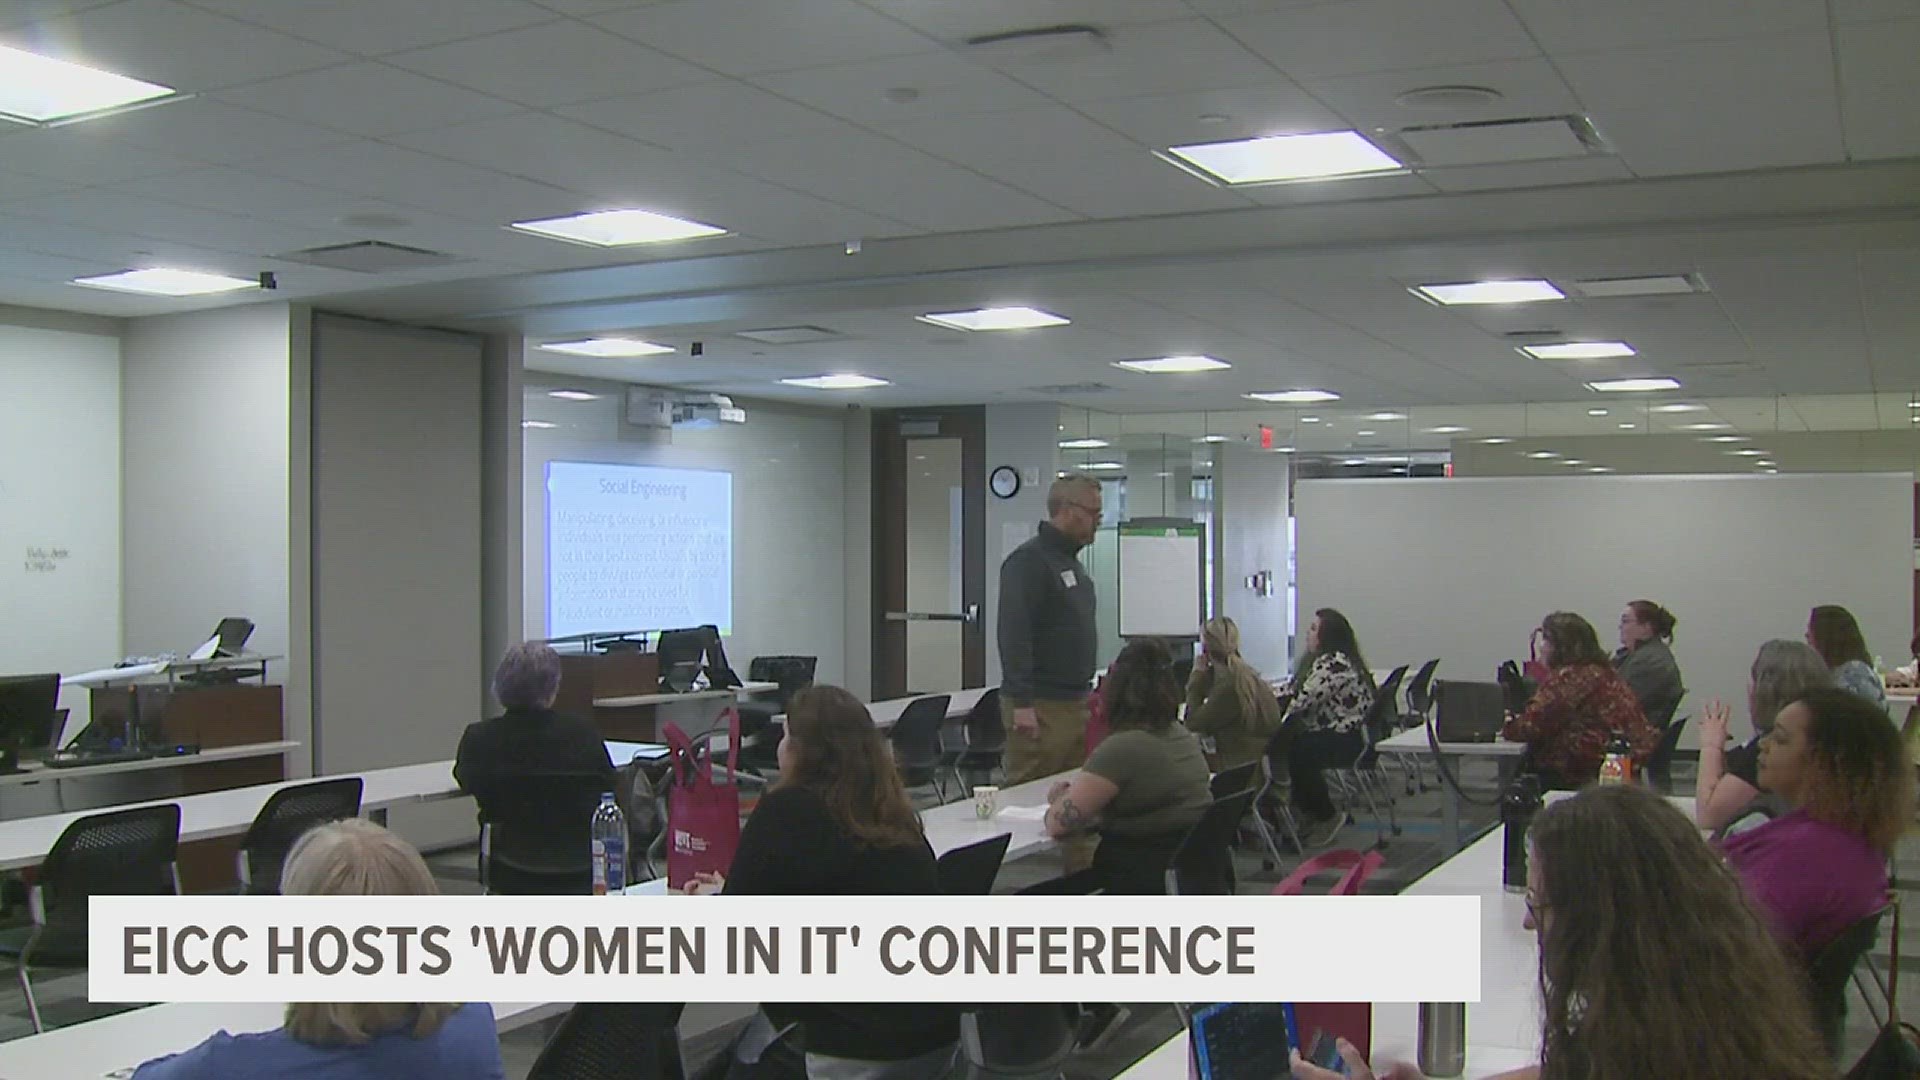 Organizers said it was an opportunity to introduce women into the career field overwhelmingly dominated by men.